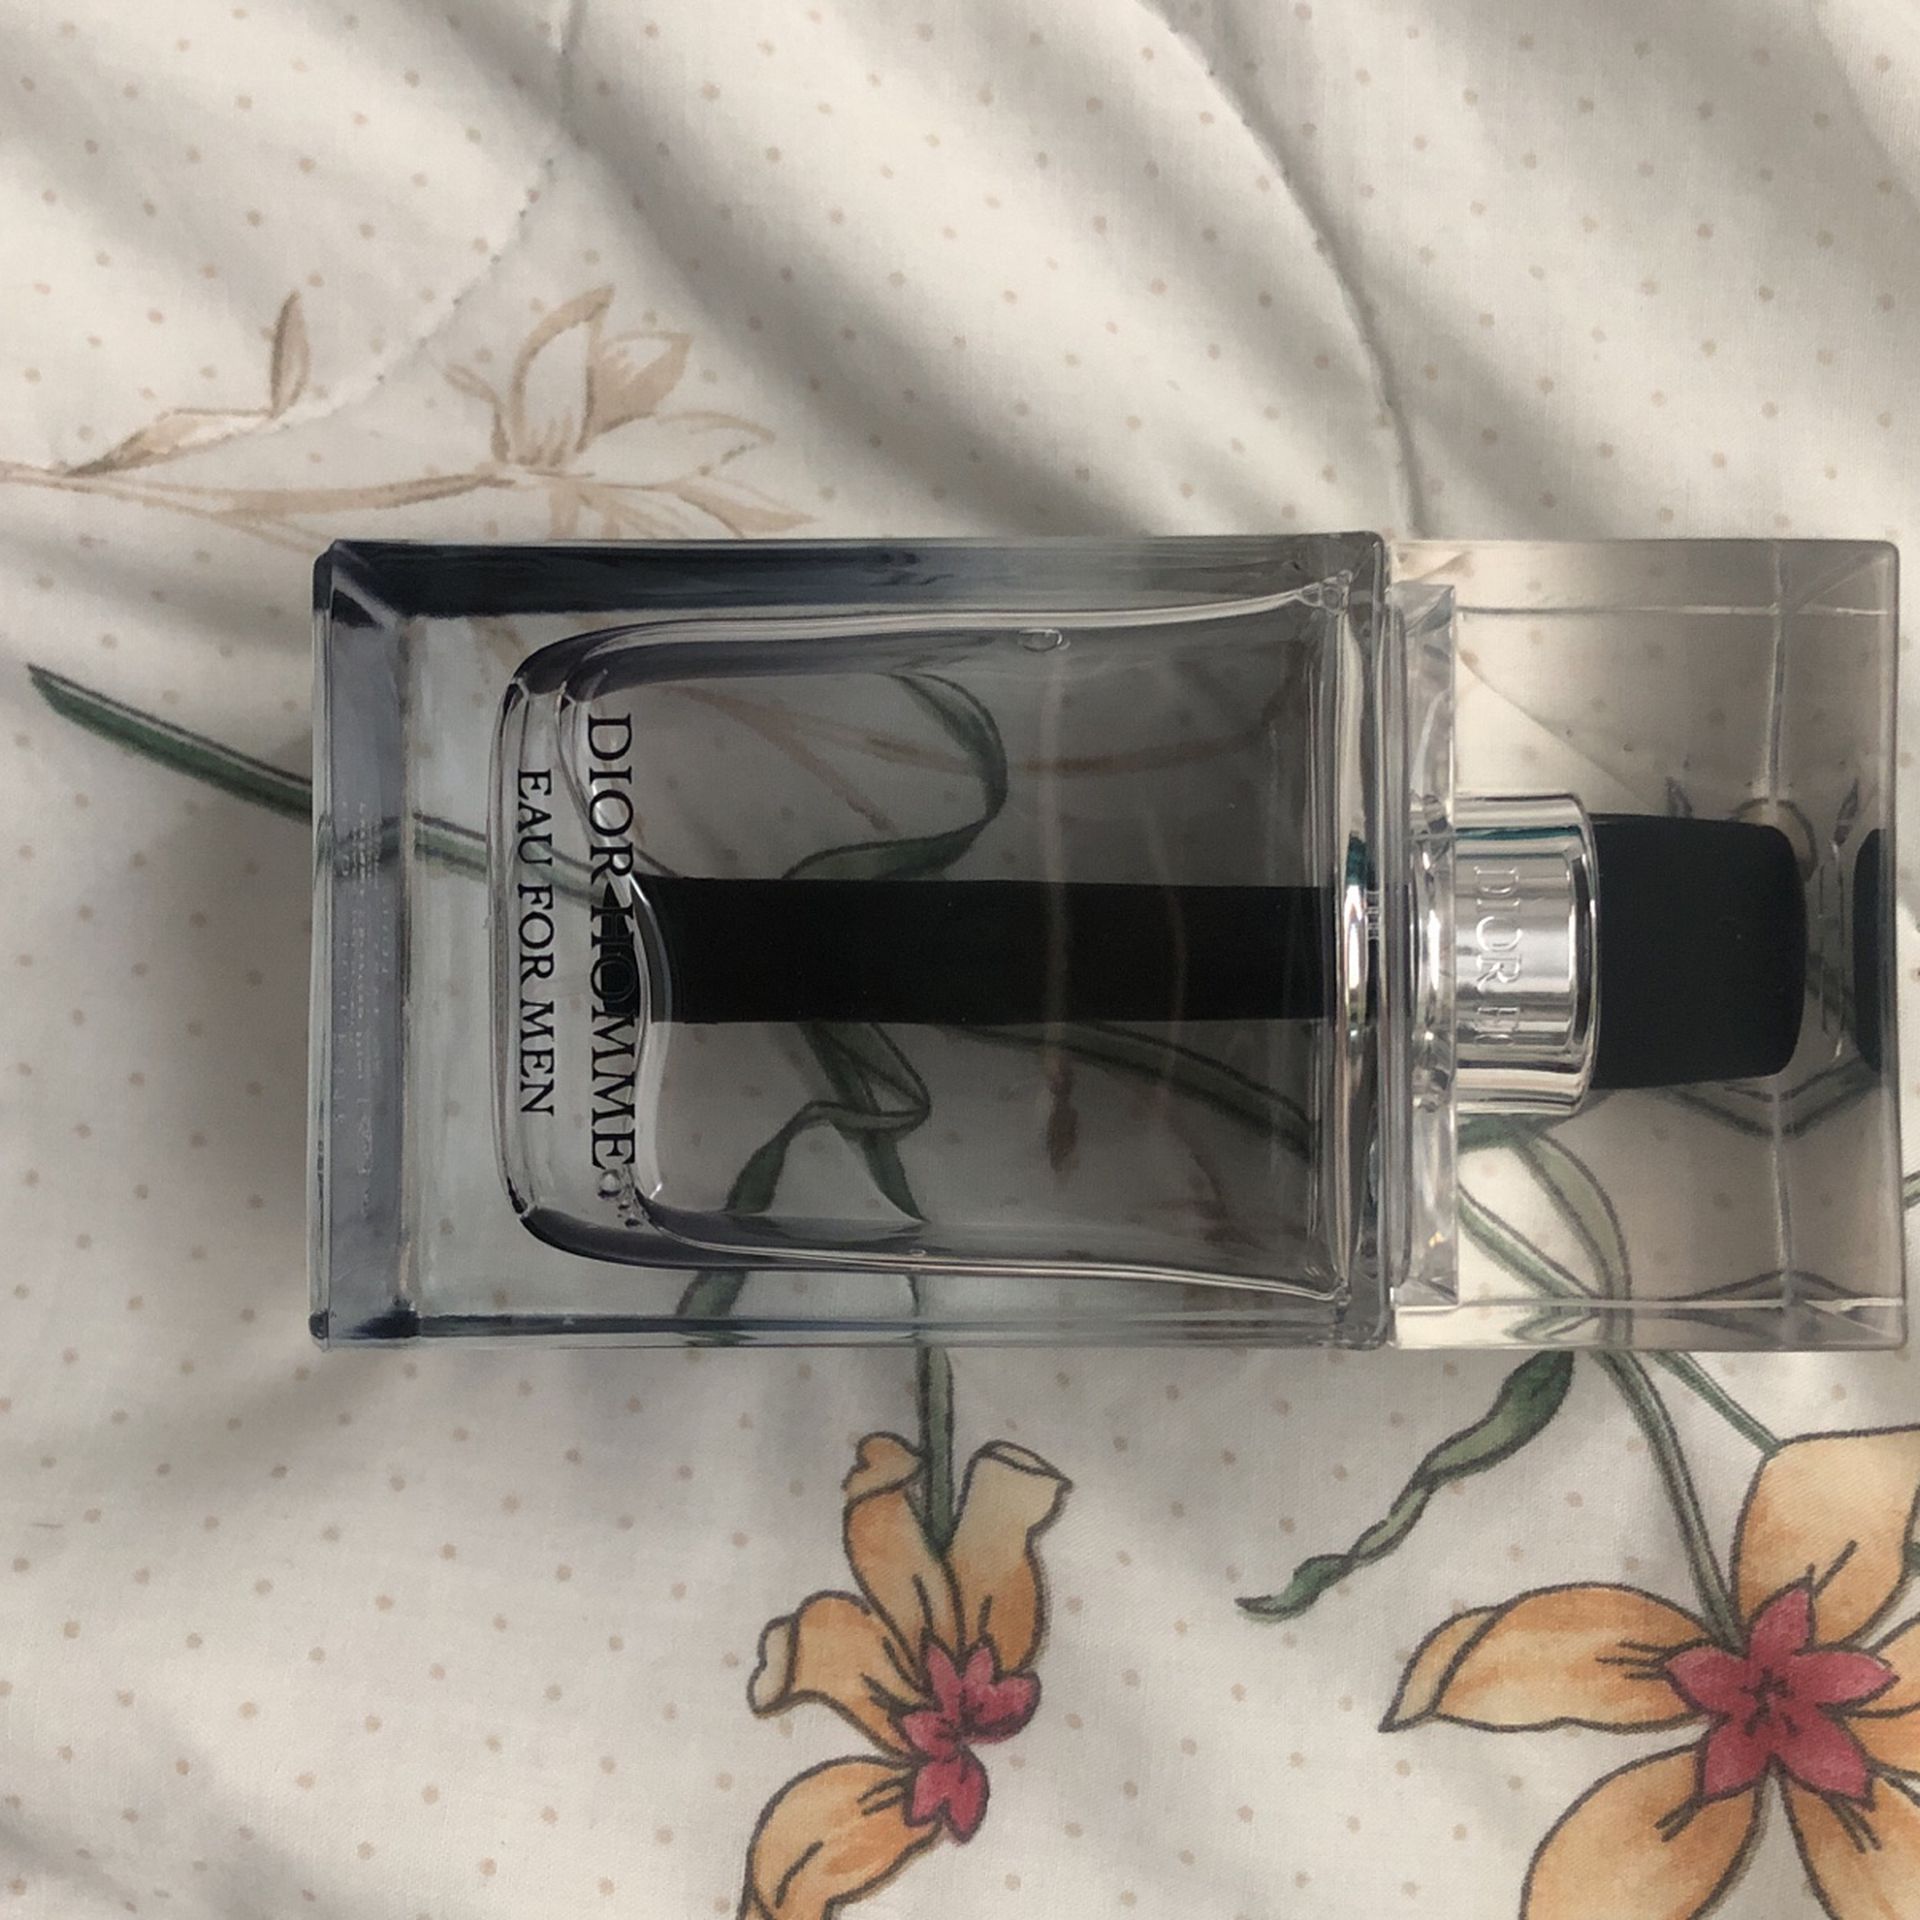 Brand New Coco Chanel Perfume for Sale in San Diego, CA - OfferUp